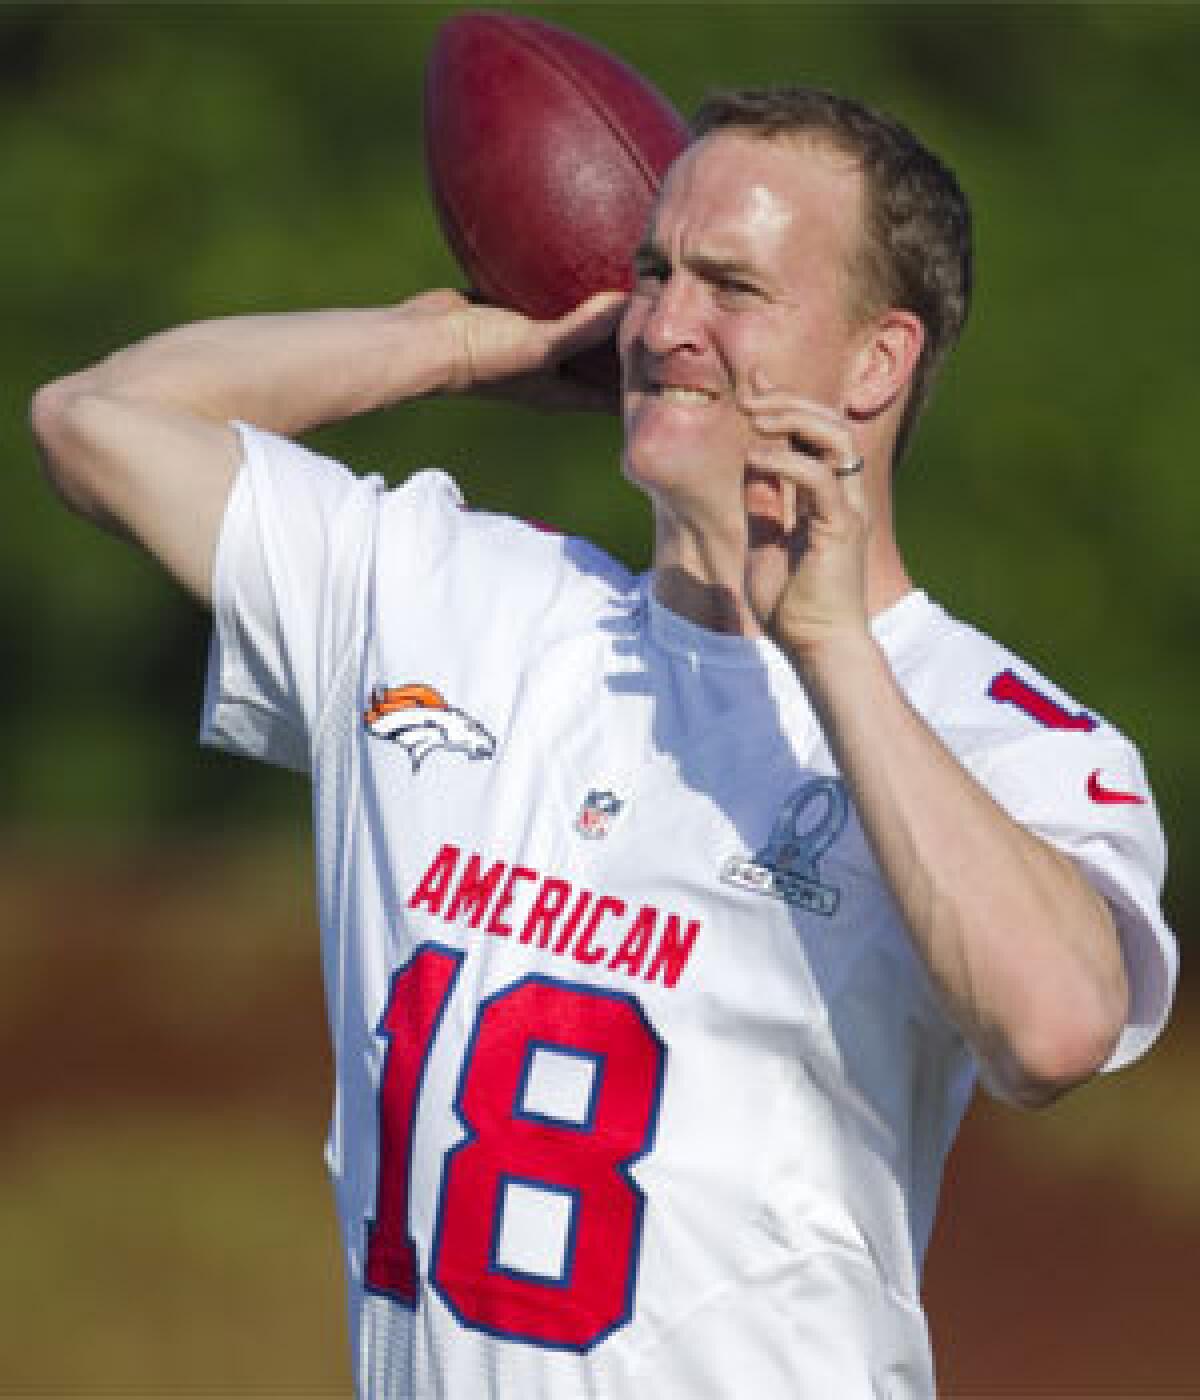 Peyton Manning took the Pro Bowl seriously. Check out that look of determination on his face -- and that was just at practice Friday.